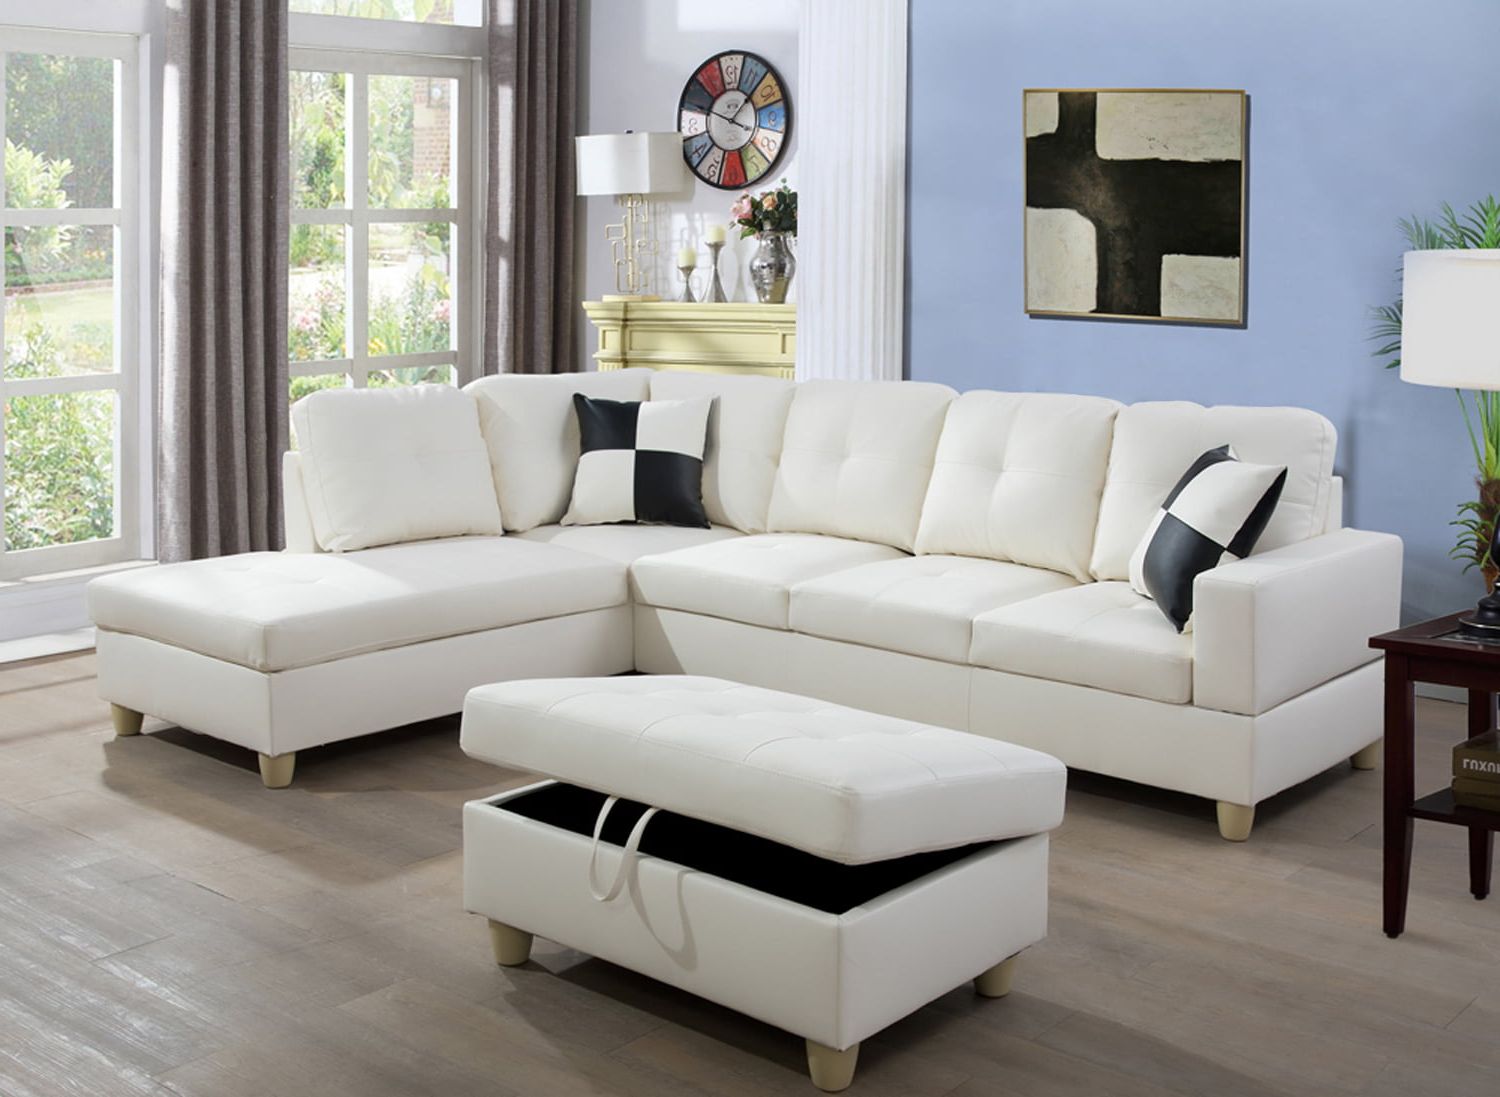 Ainehome Faux Leather Sectional Set, Living Room L Shaped Modern Sofa Within Sofas With Ottomans (View 7 of 20)